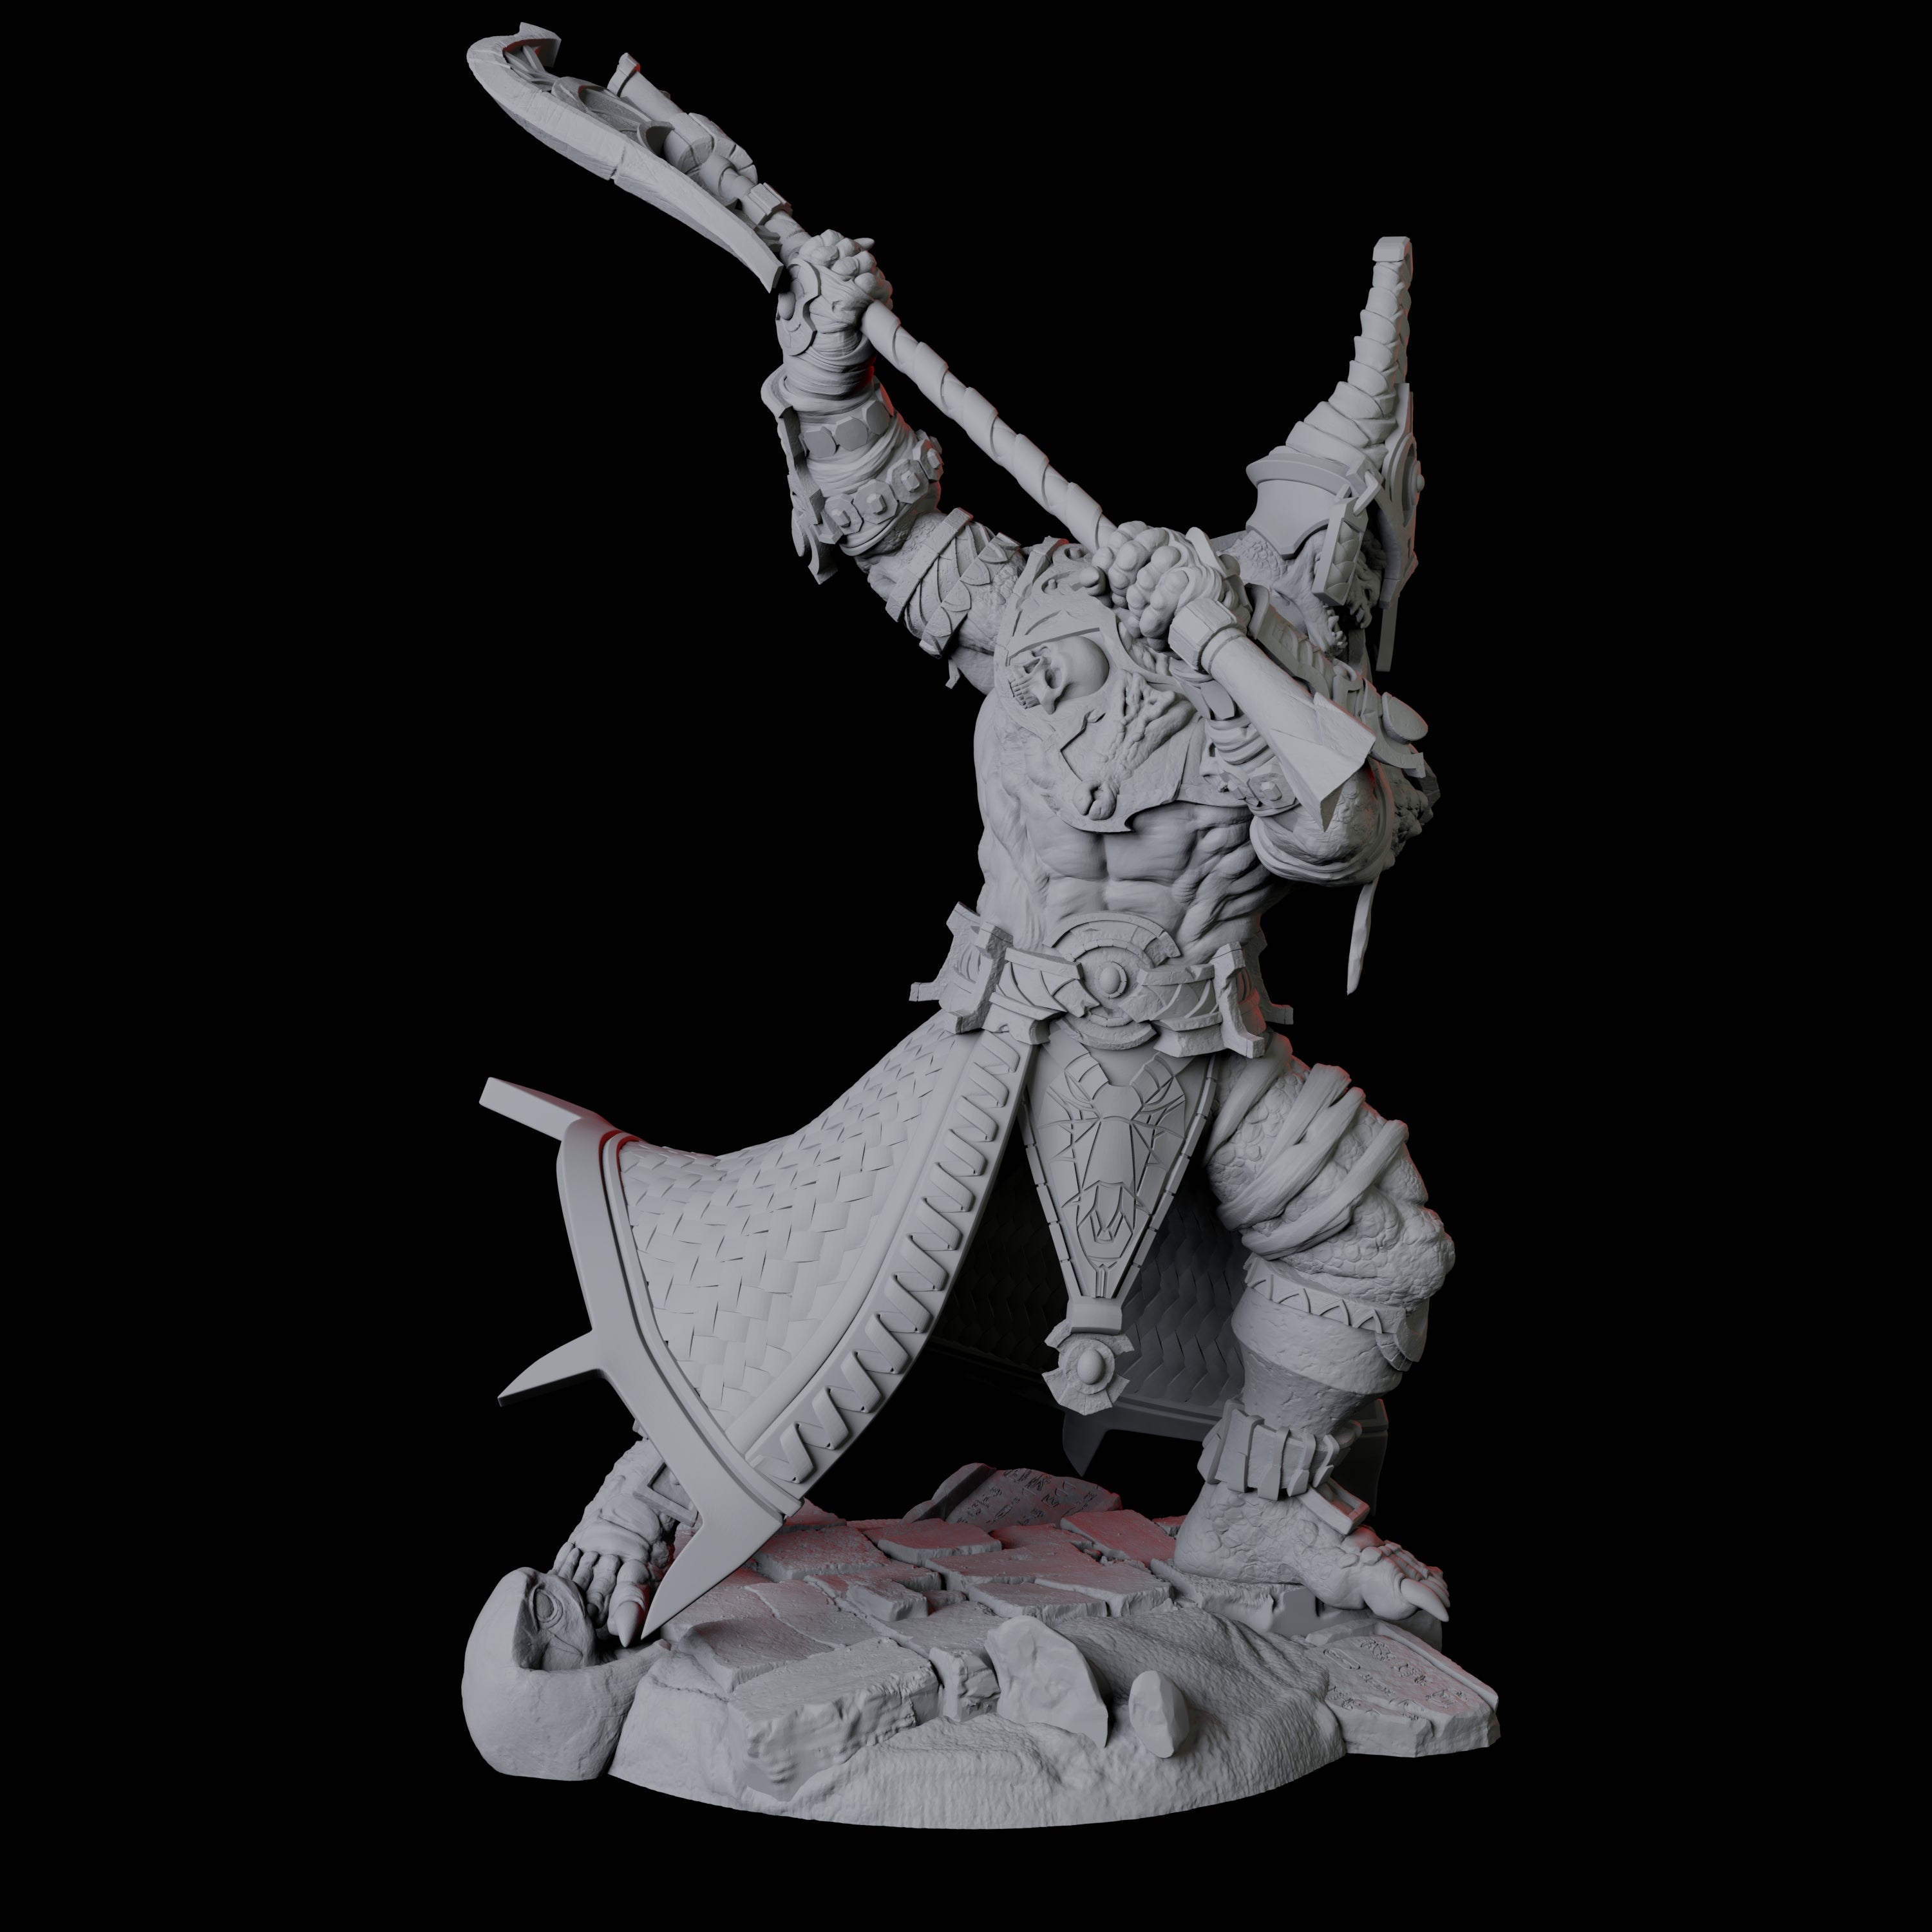 Saurian War Priest B Miniature for Dungeons and Dragons, Pathfinder or other TTRPGs